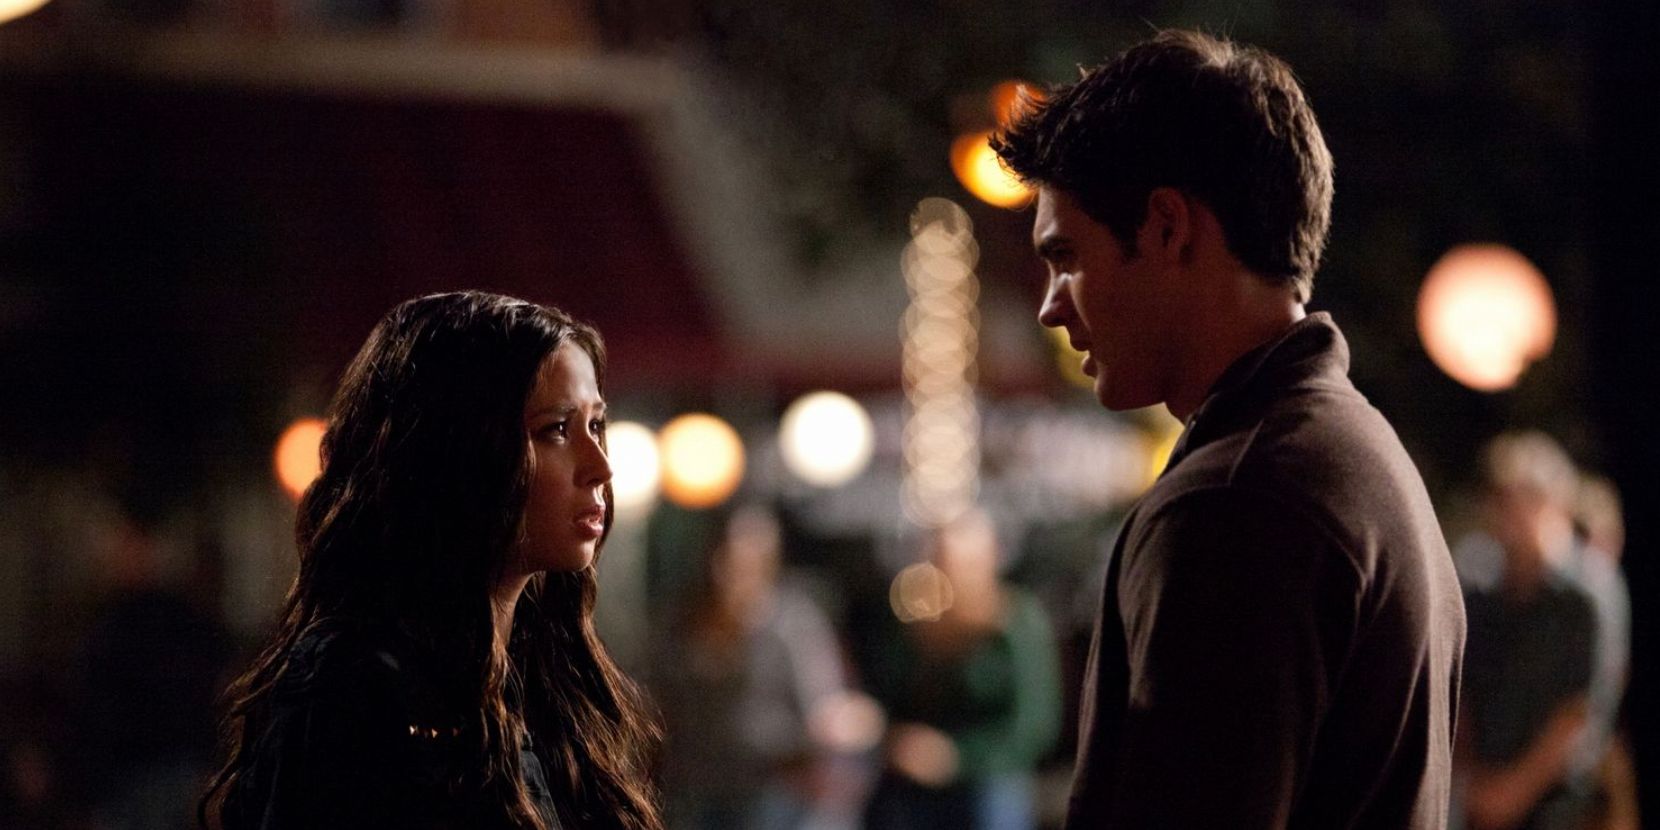 Anna and Jeremy talk outside in The Vampire Diaries